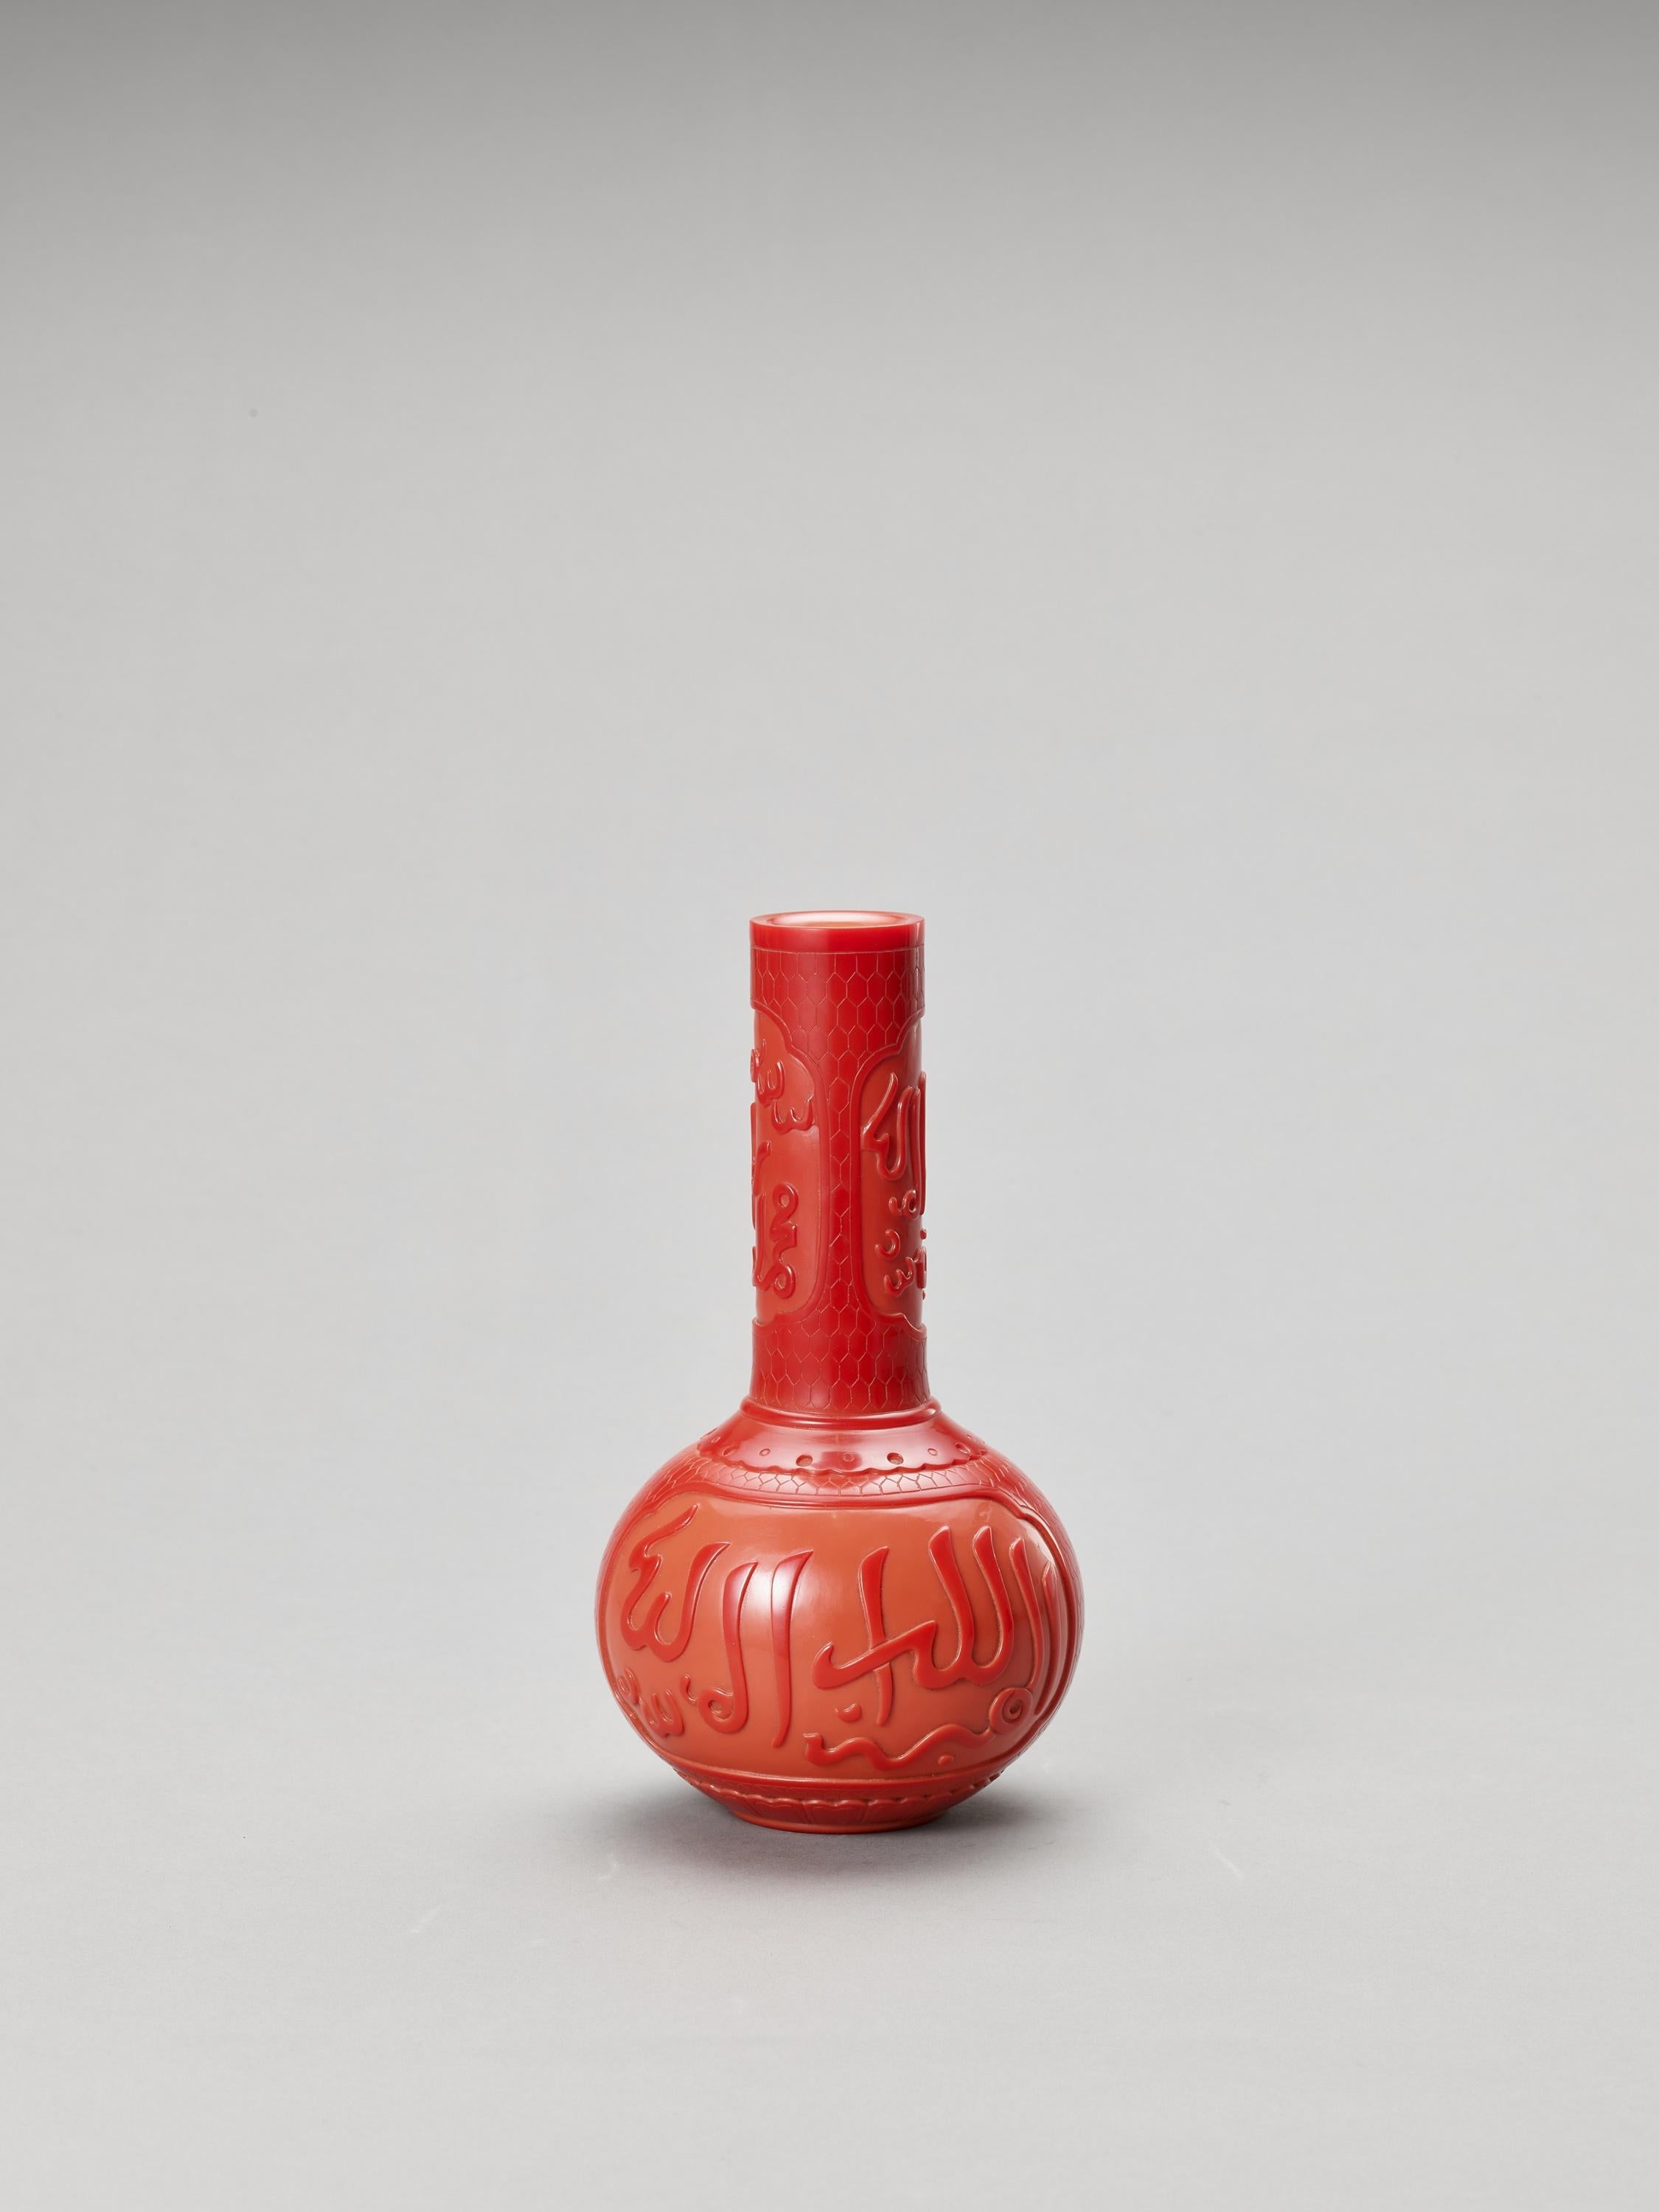 A red peking glass bottle vase for the Islamic Market, China, 20th Century

The globular body and tall neck are carved through the opaque dark red outer layer to the light red body with reserves containing Arabic inscriptions. The base with an